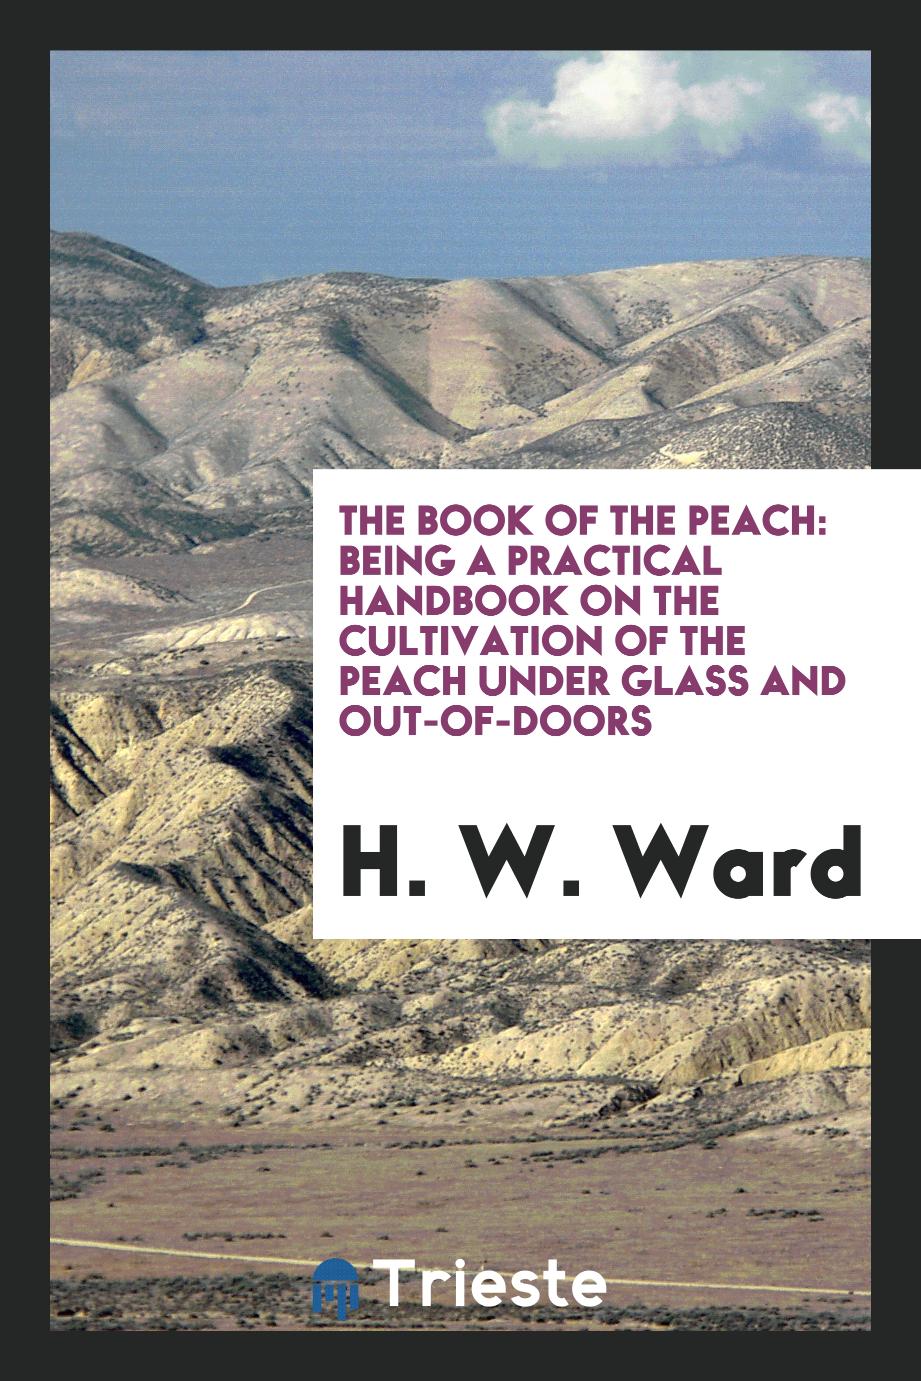 The Book of the Peach: Being a Practical Handbook on the Cultivation of the Peach Under Glass and Out-of-Doors